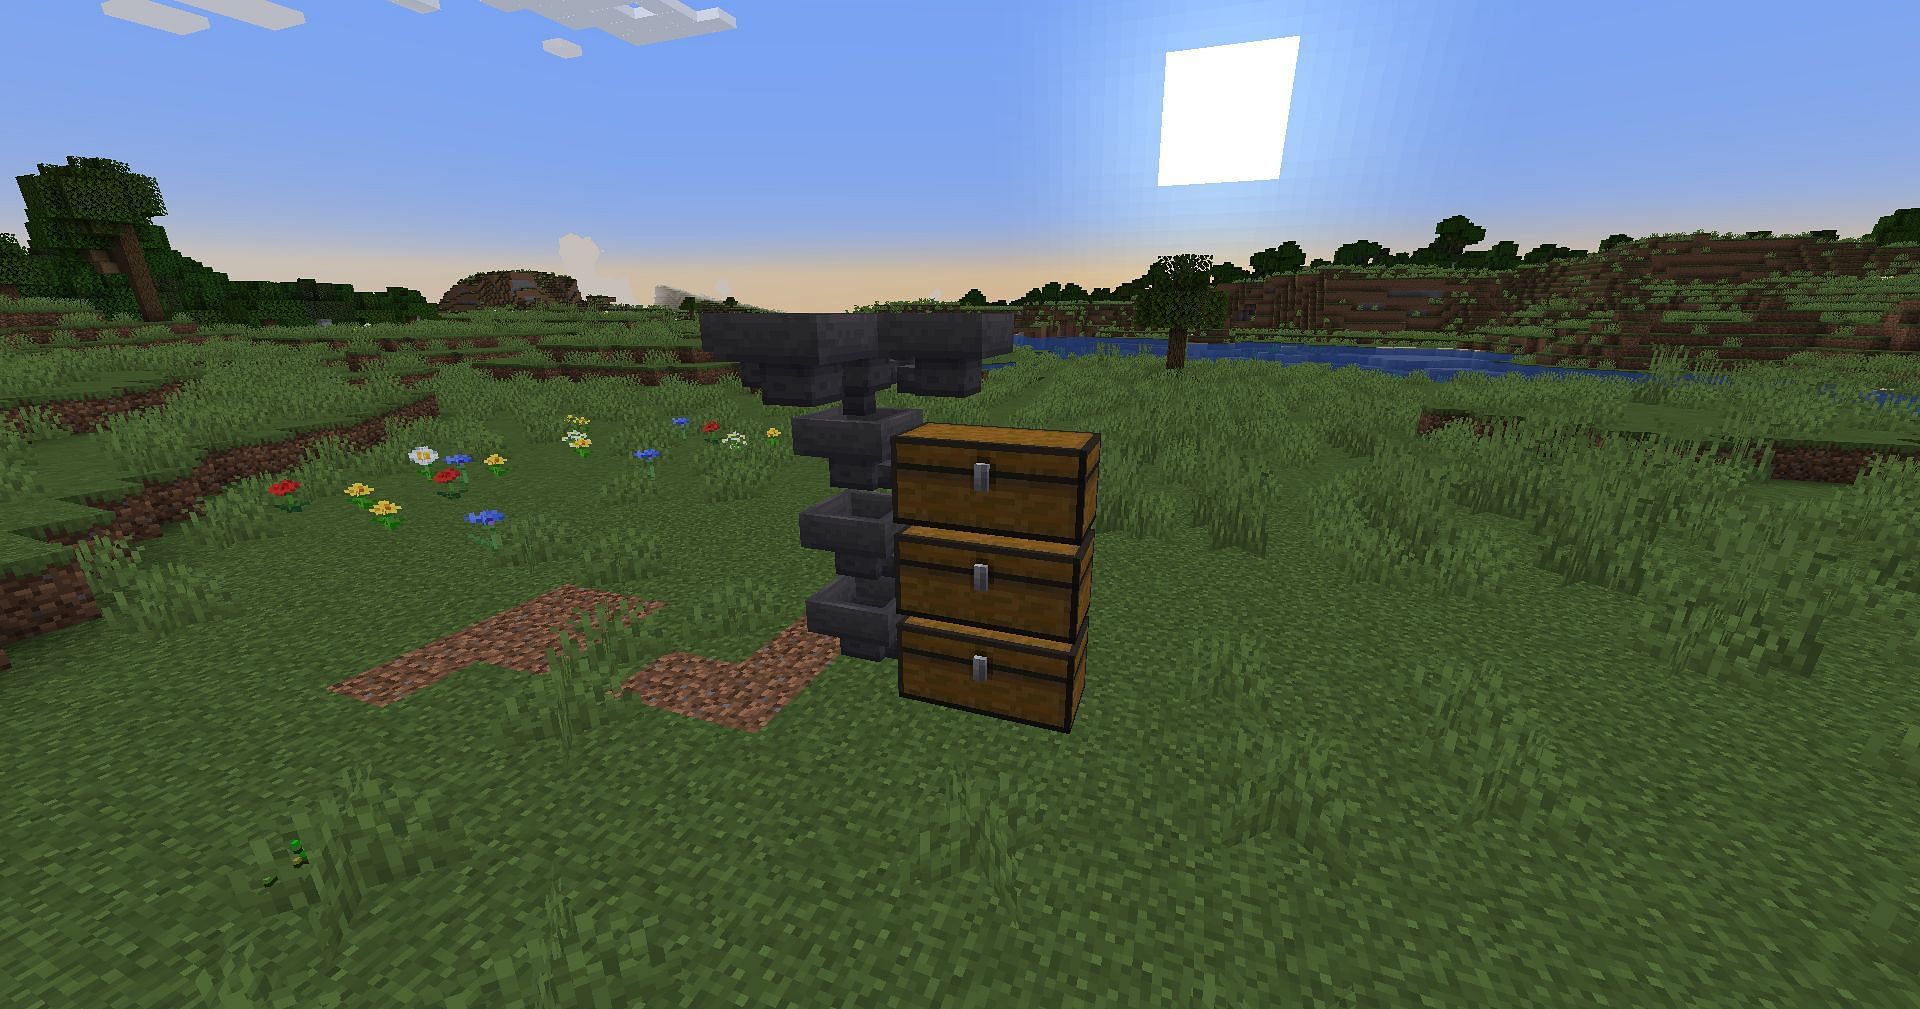 Ample storage is important to keep the farm running (Image via Mojang)